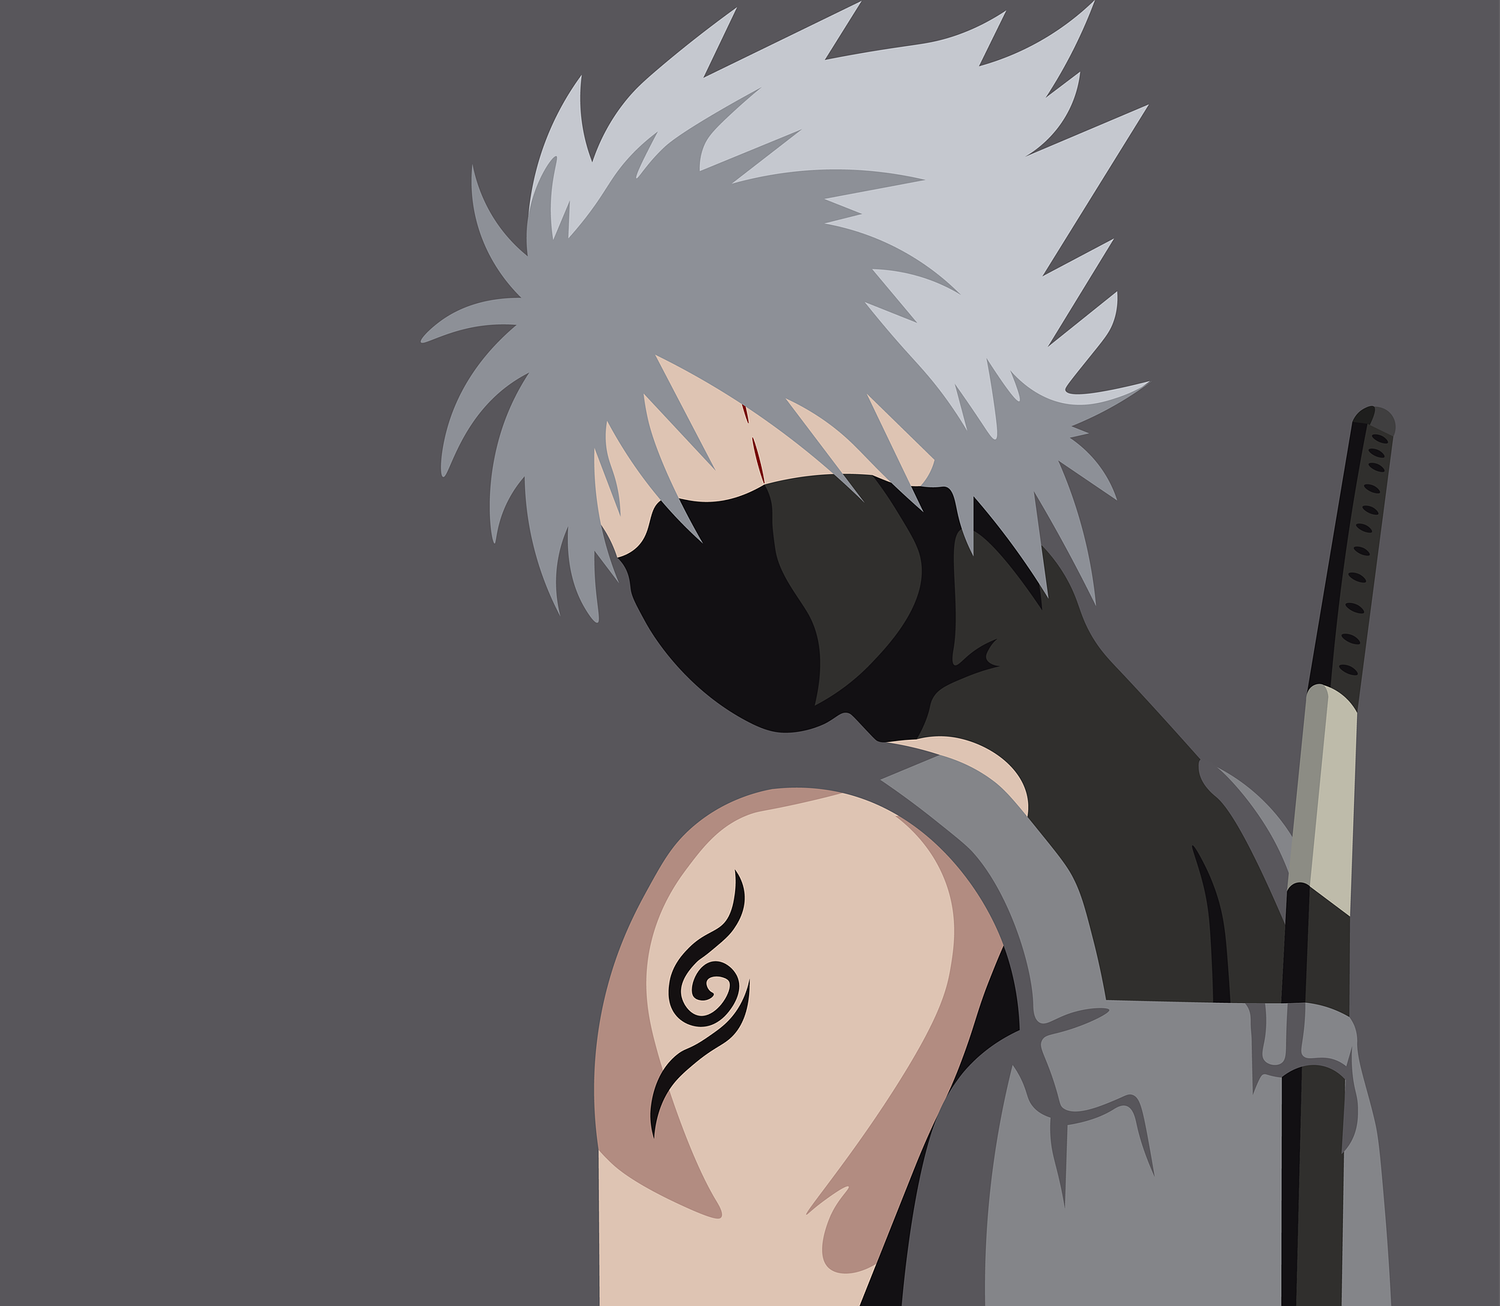 show me a picture of kakashi